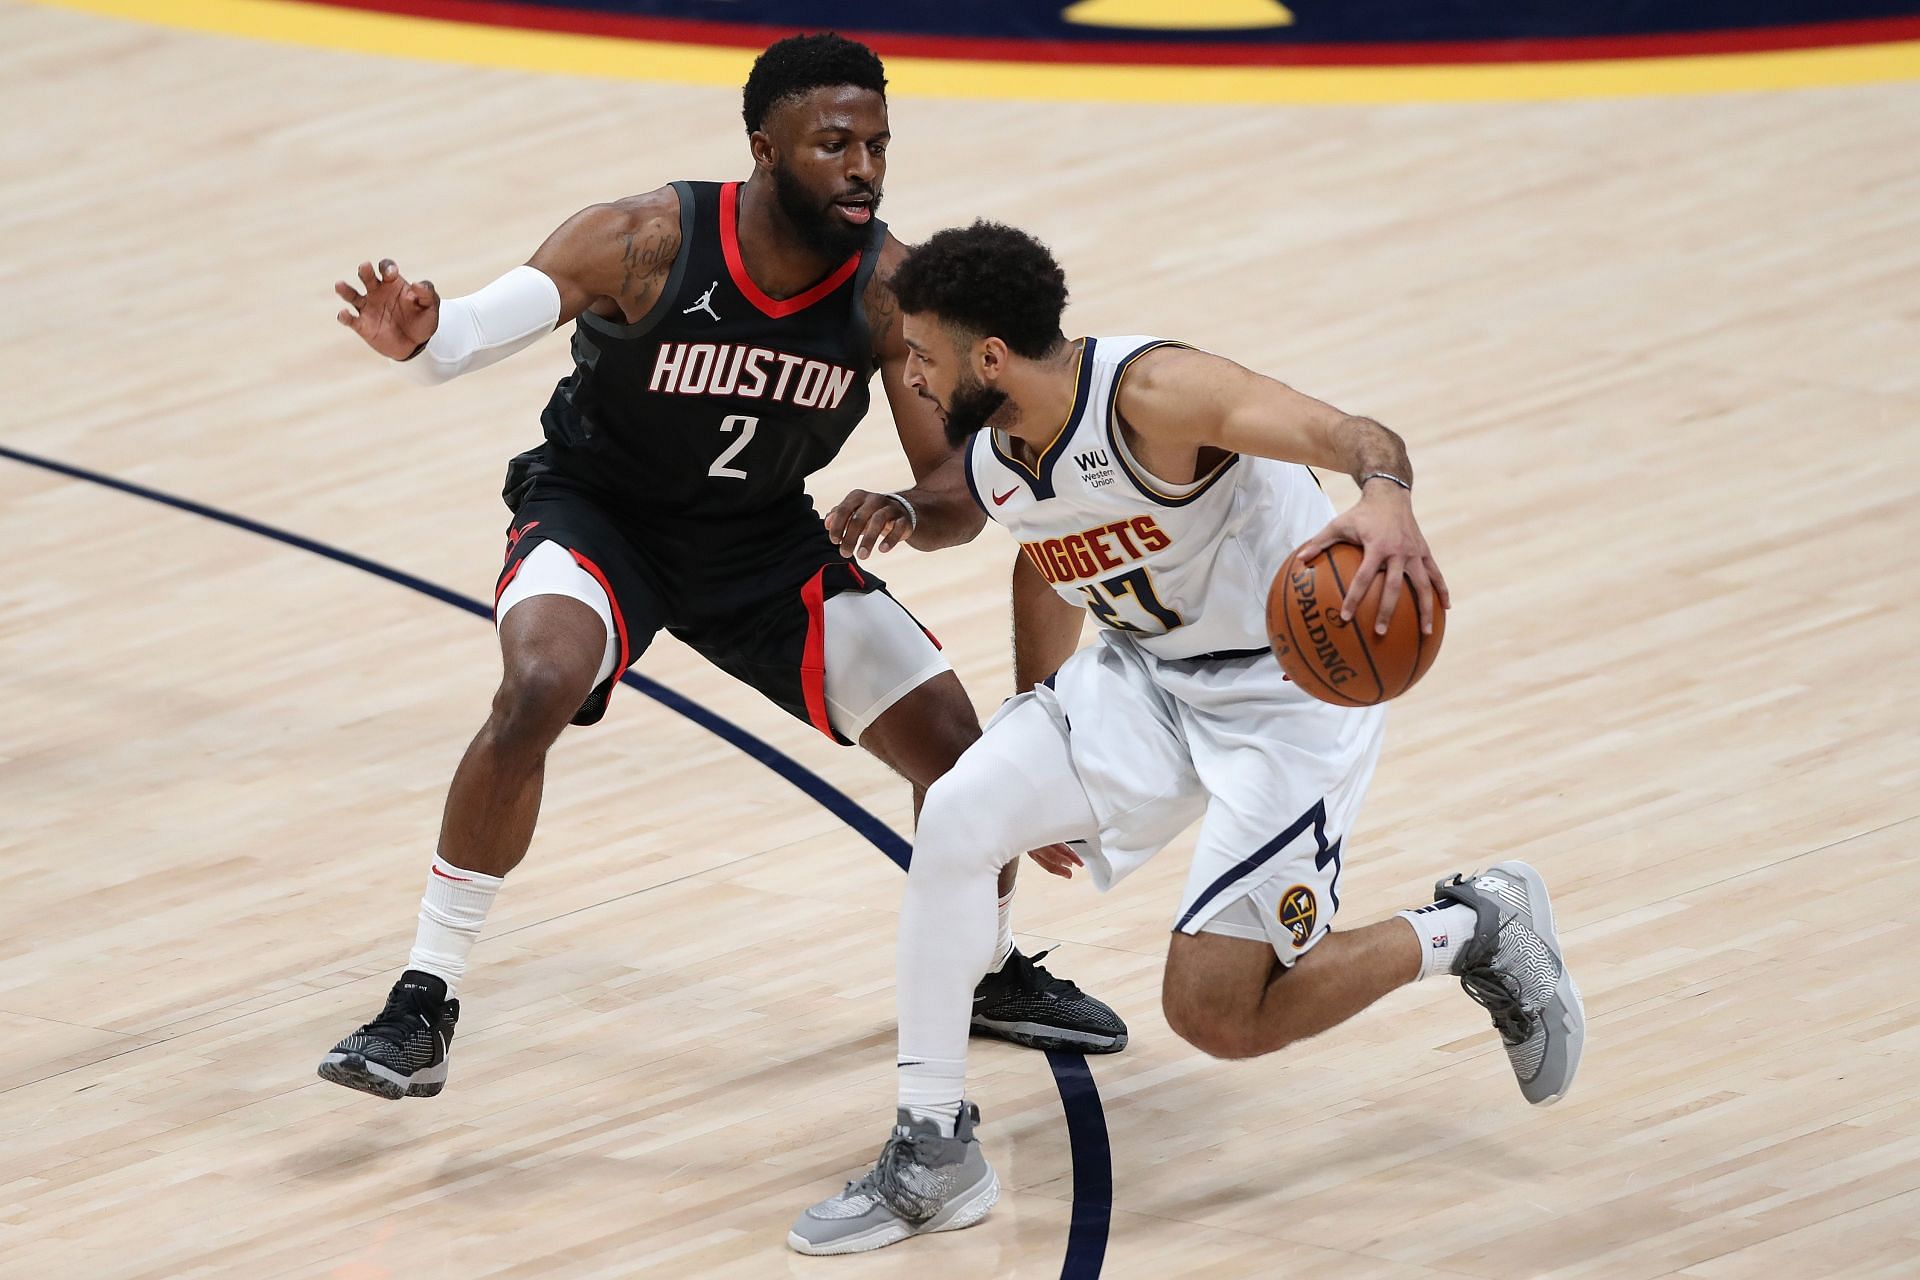 Three reasons to pay attention to the Rockets in 2021-22 NBA